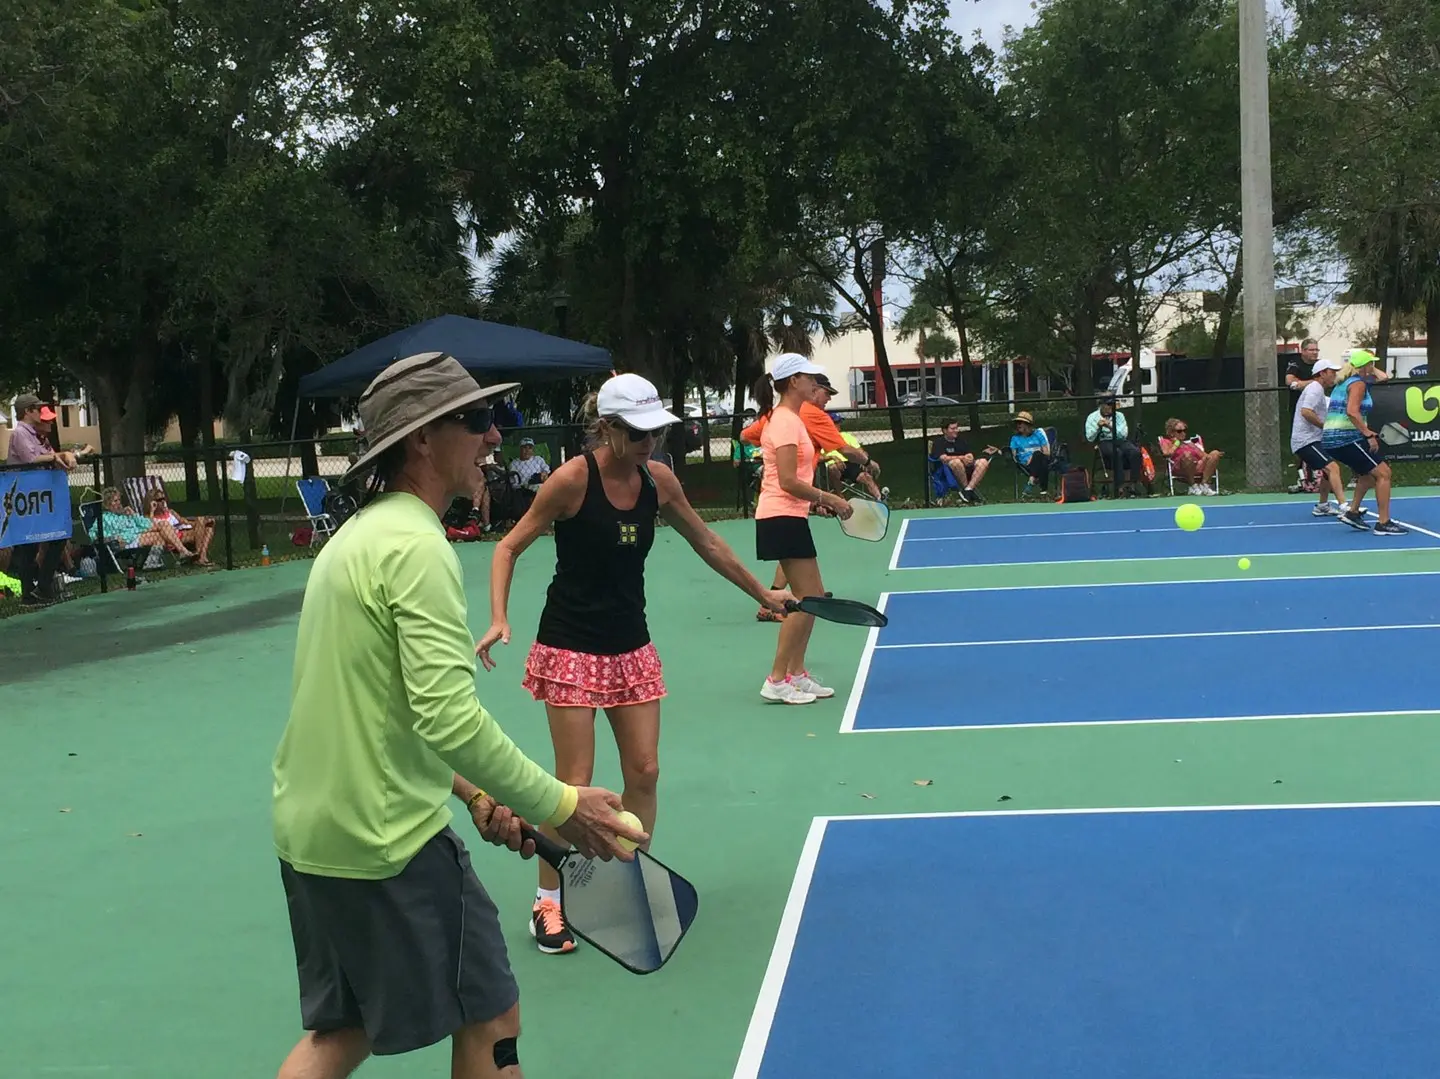 instructor helping a player with pickleball